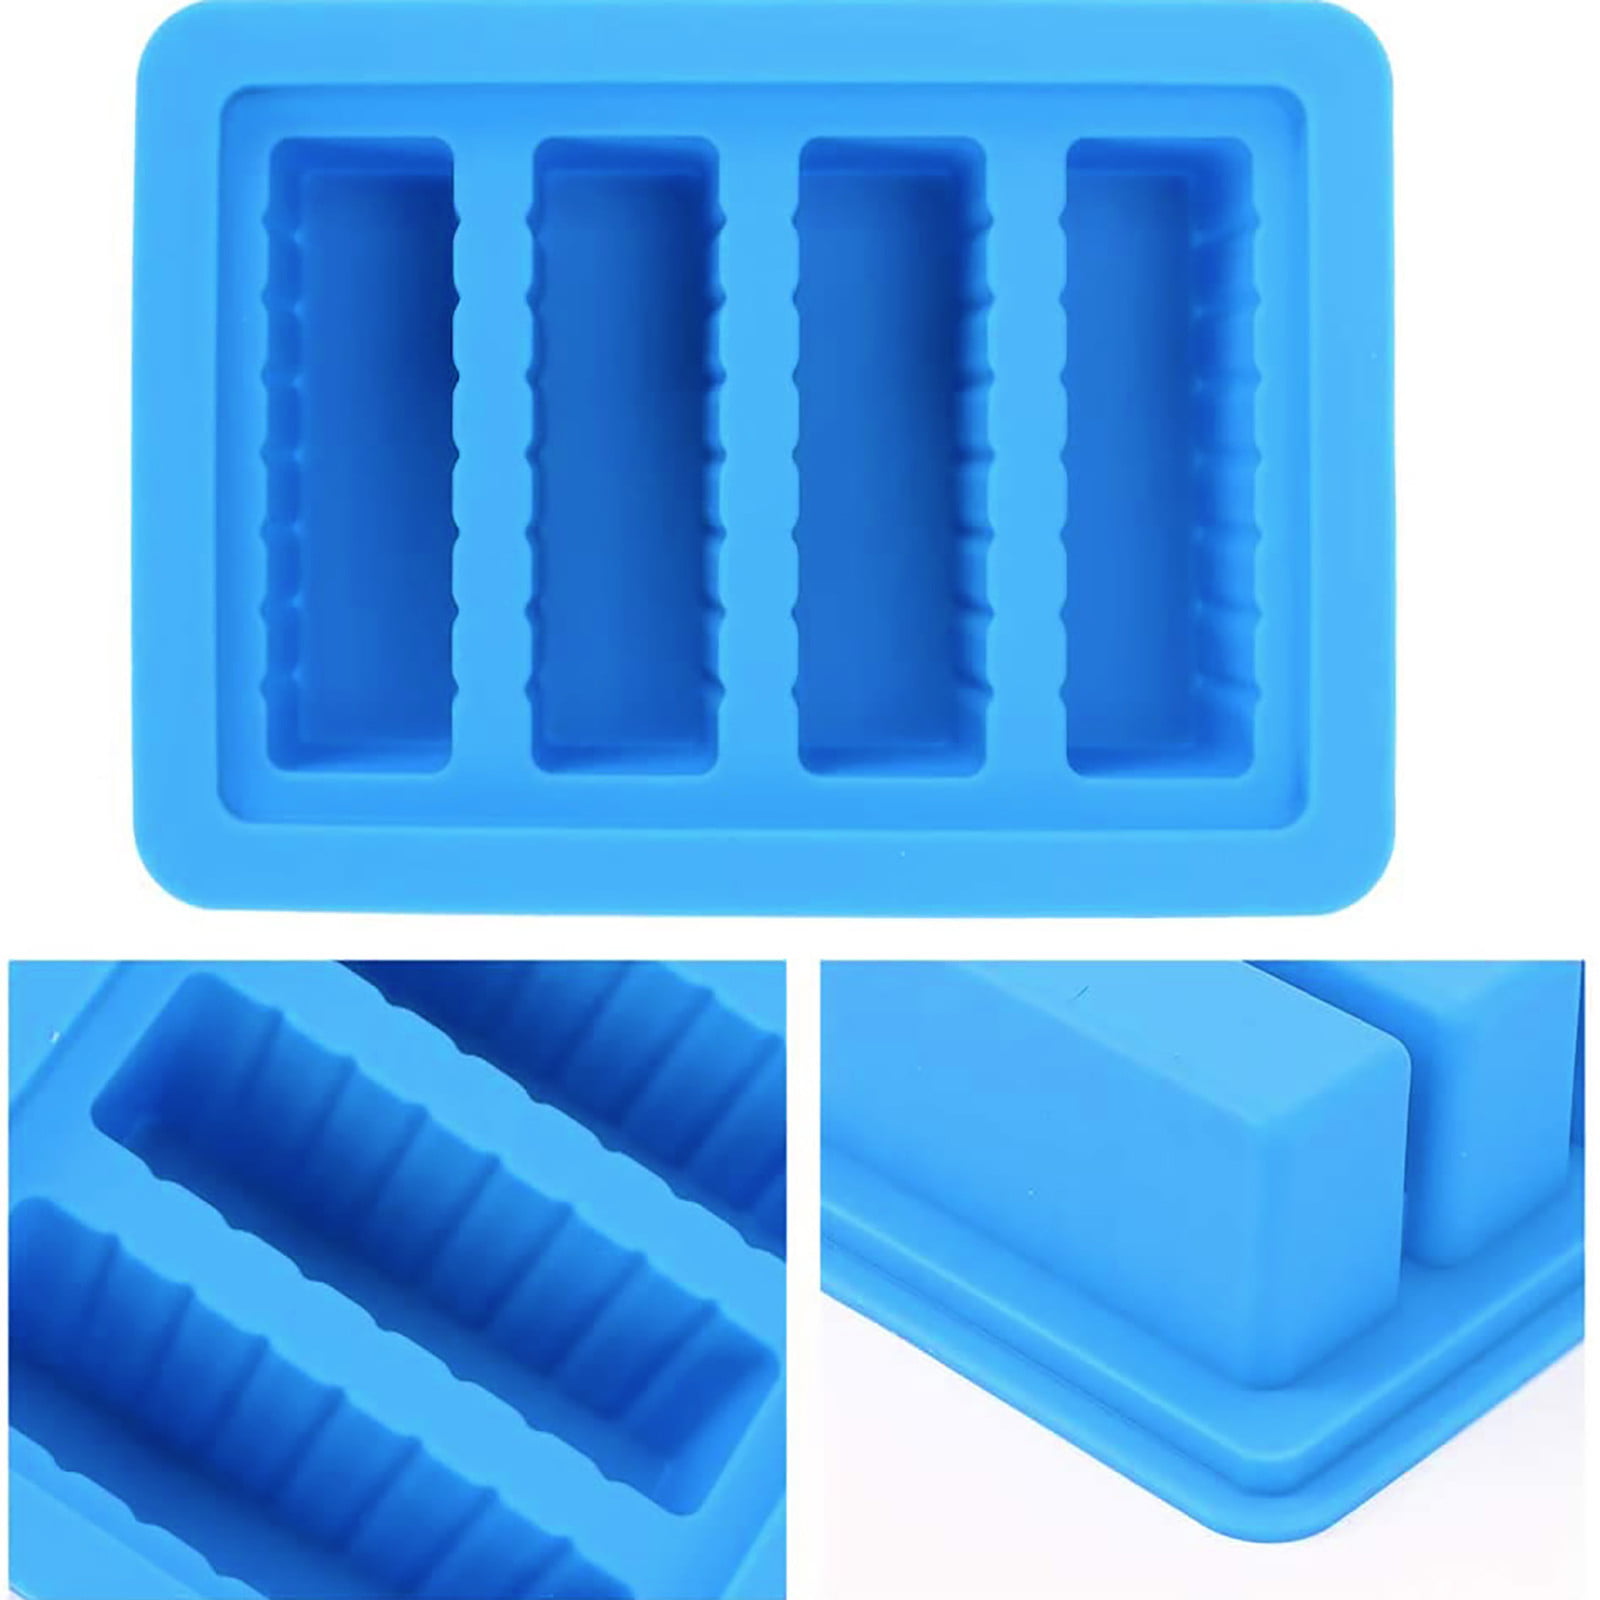 Large 4 Cavities Silicone butter mold, Pudding and Jello butter